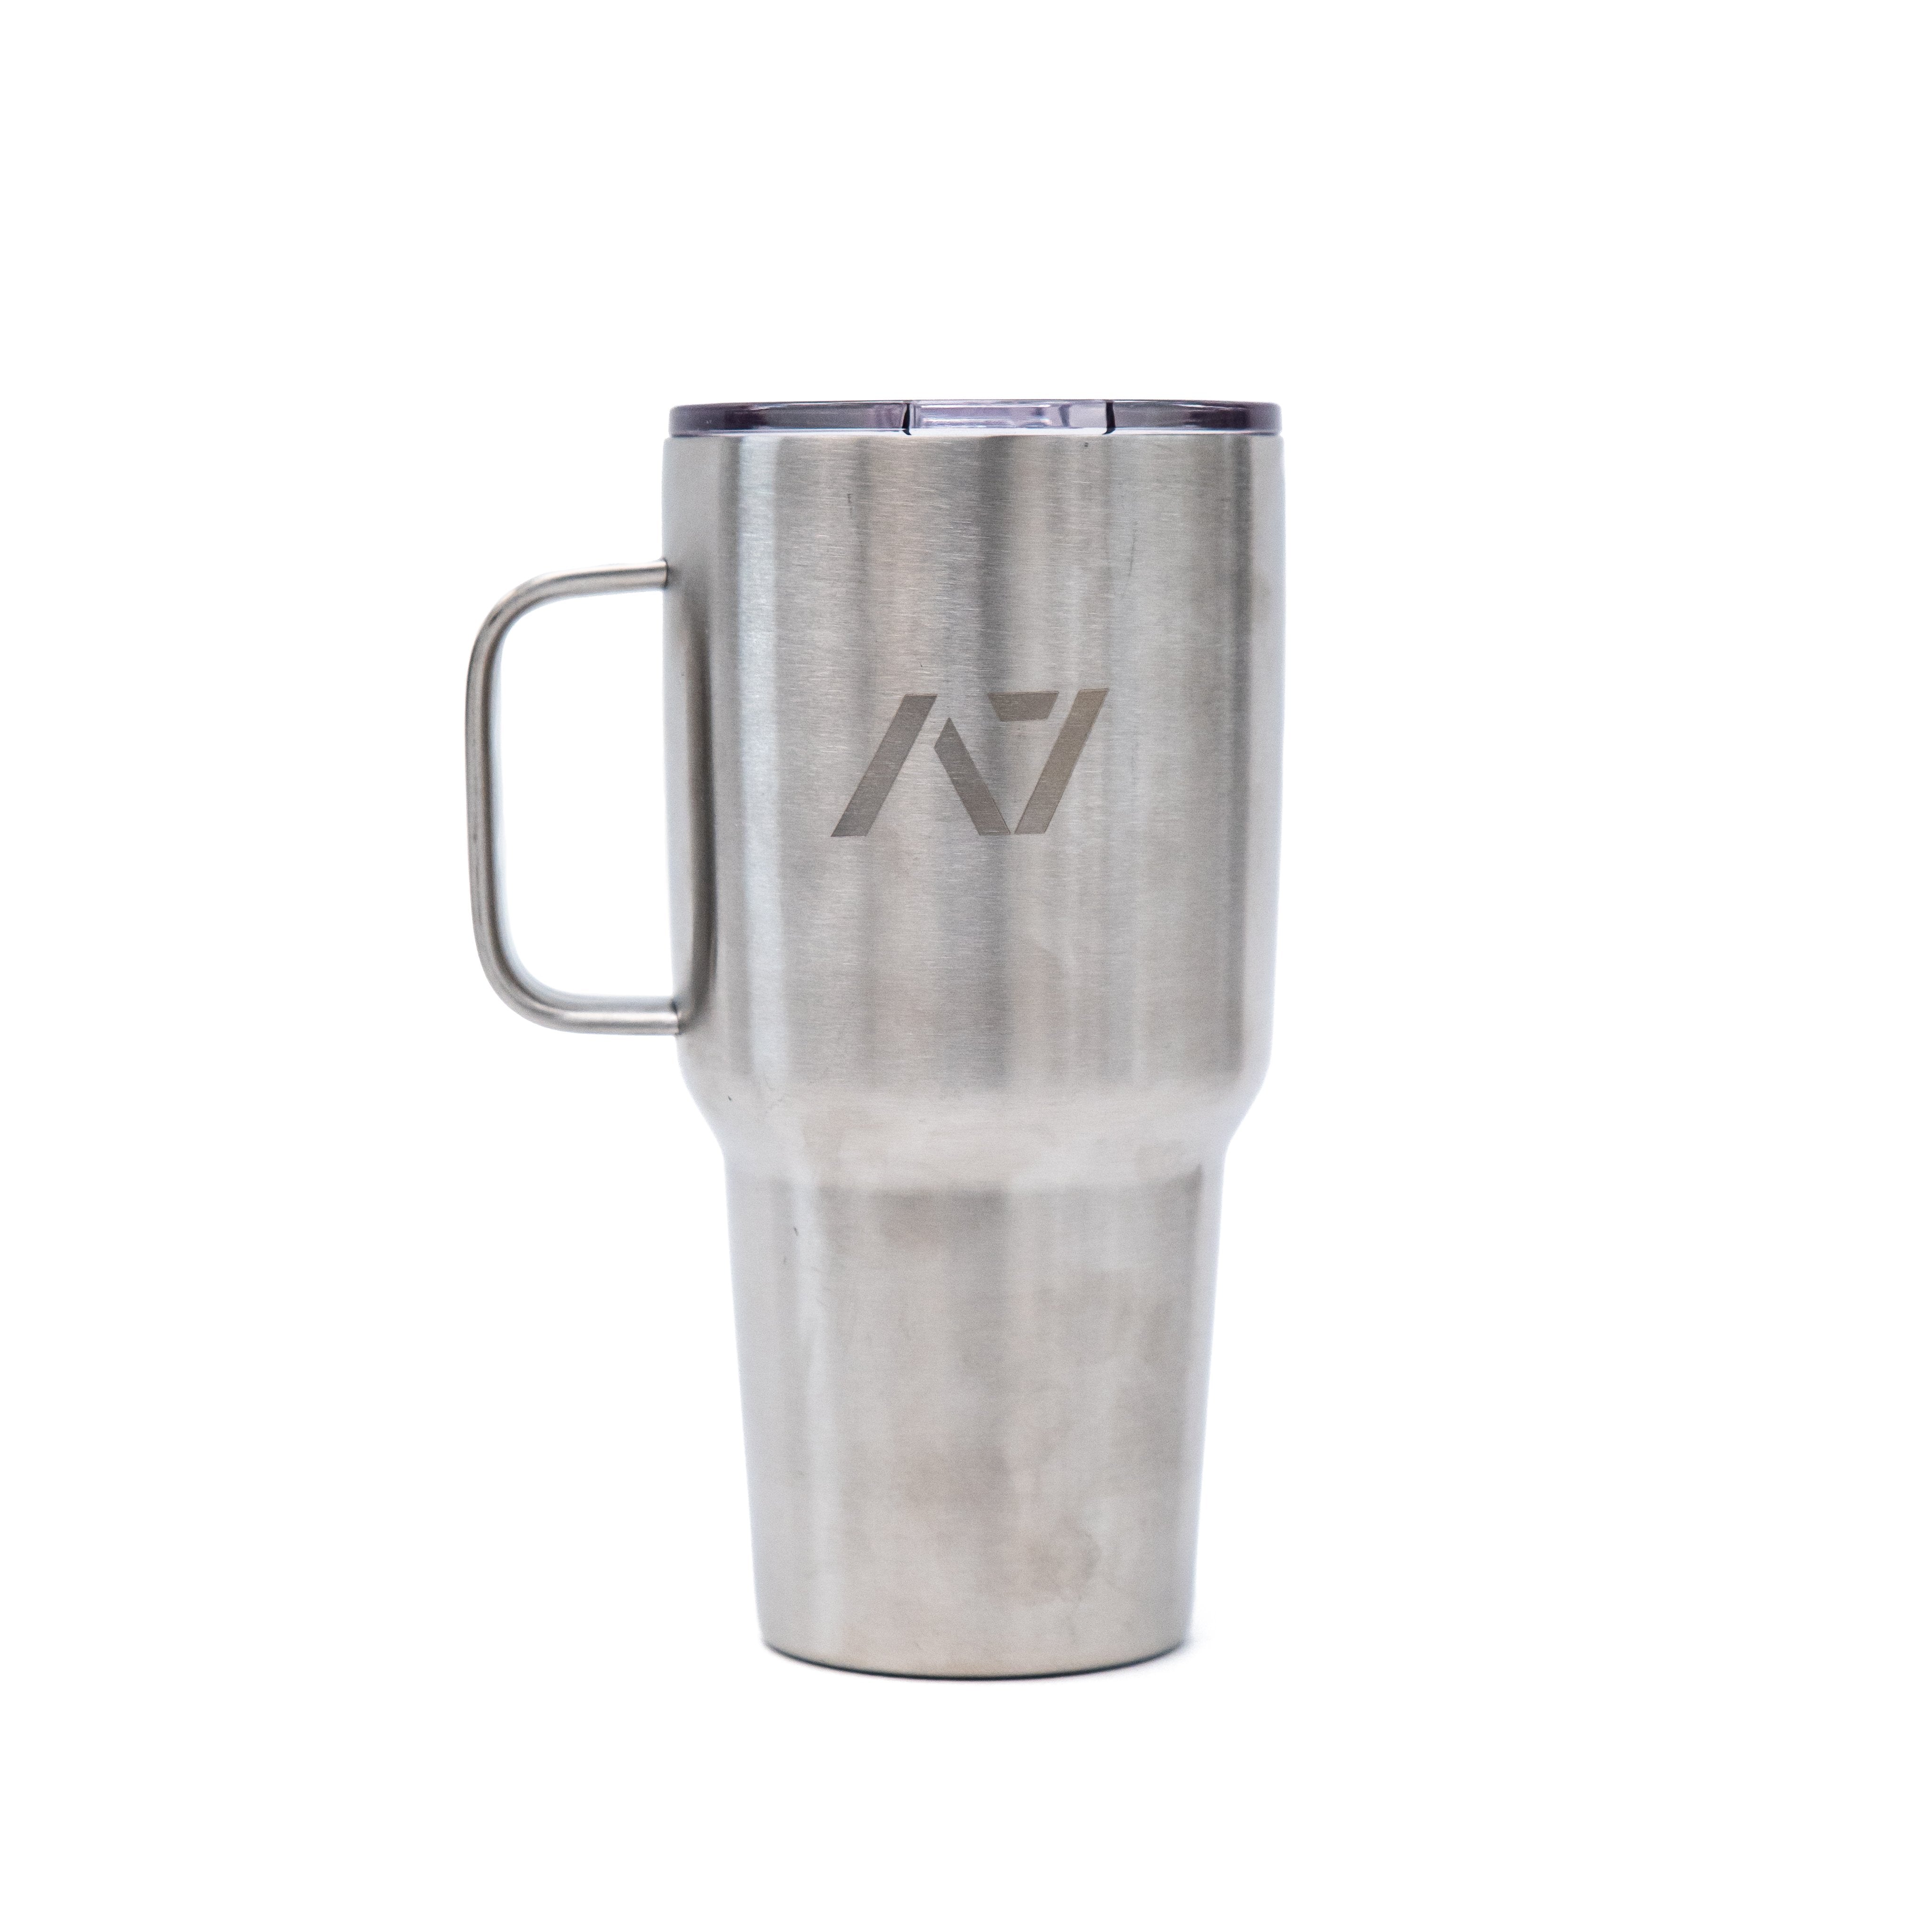 Whether you choose hot or cold beverages our double-wall insulated seamless stainless steel coffee mug is designed to keep your beverages at temperature for longer periods and includes a sliding lid to keep your beverage contained until you are ready for your next sip